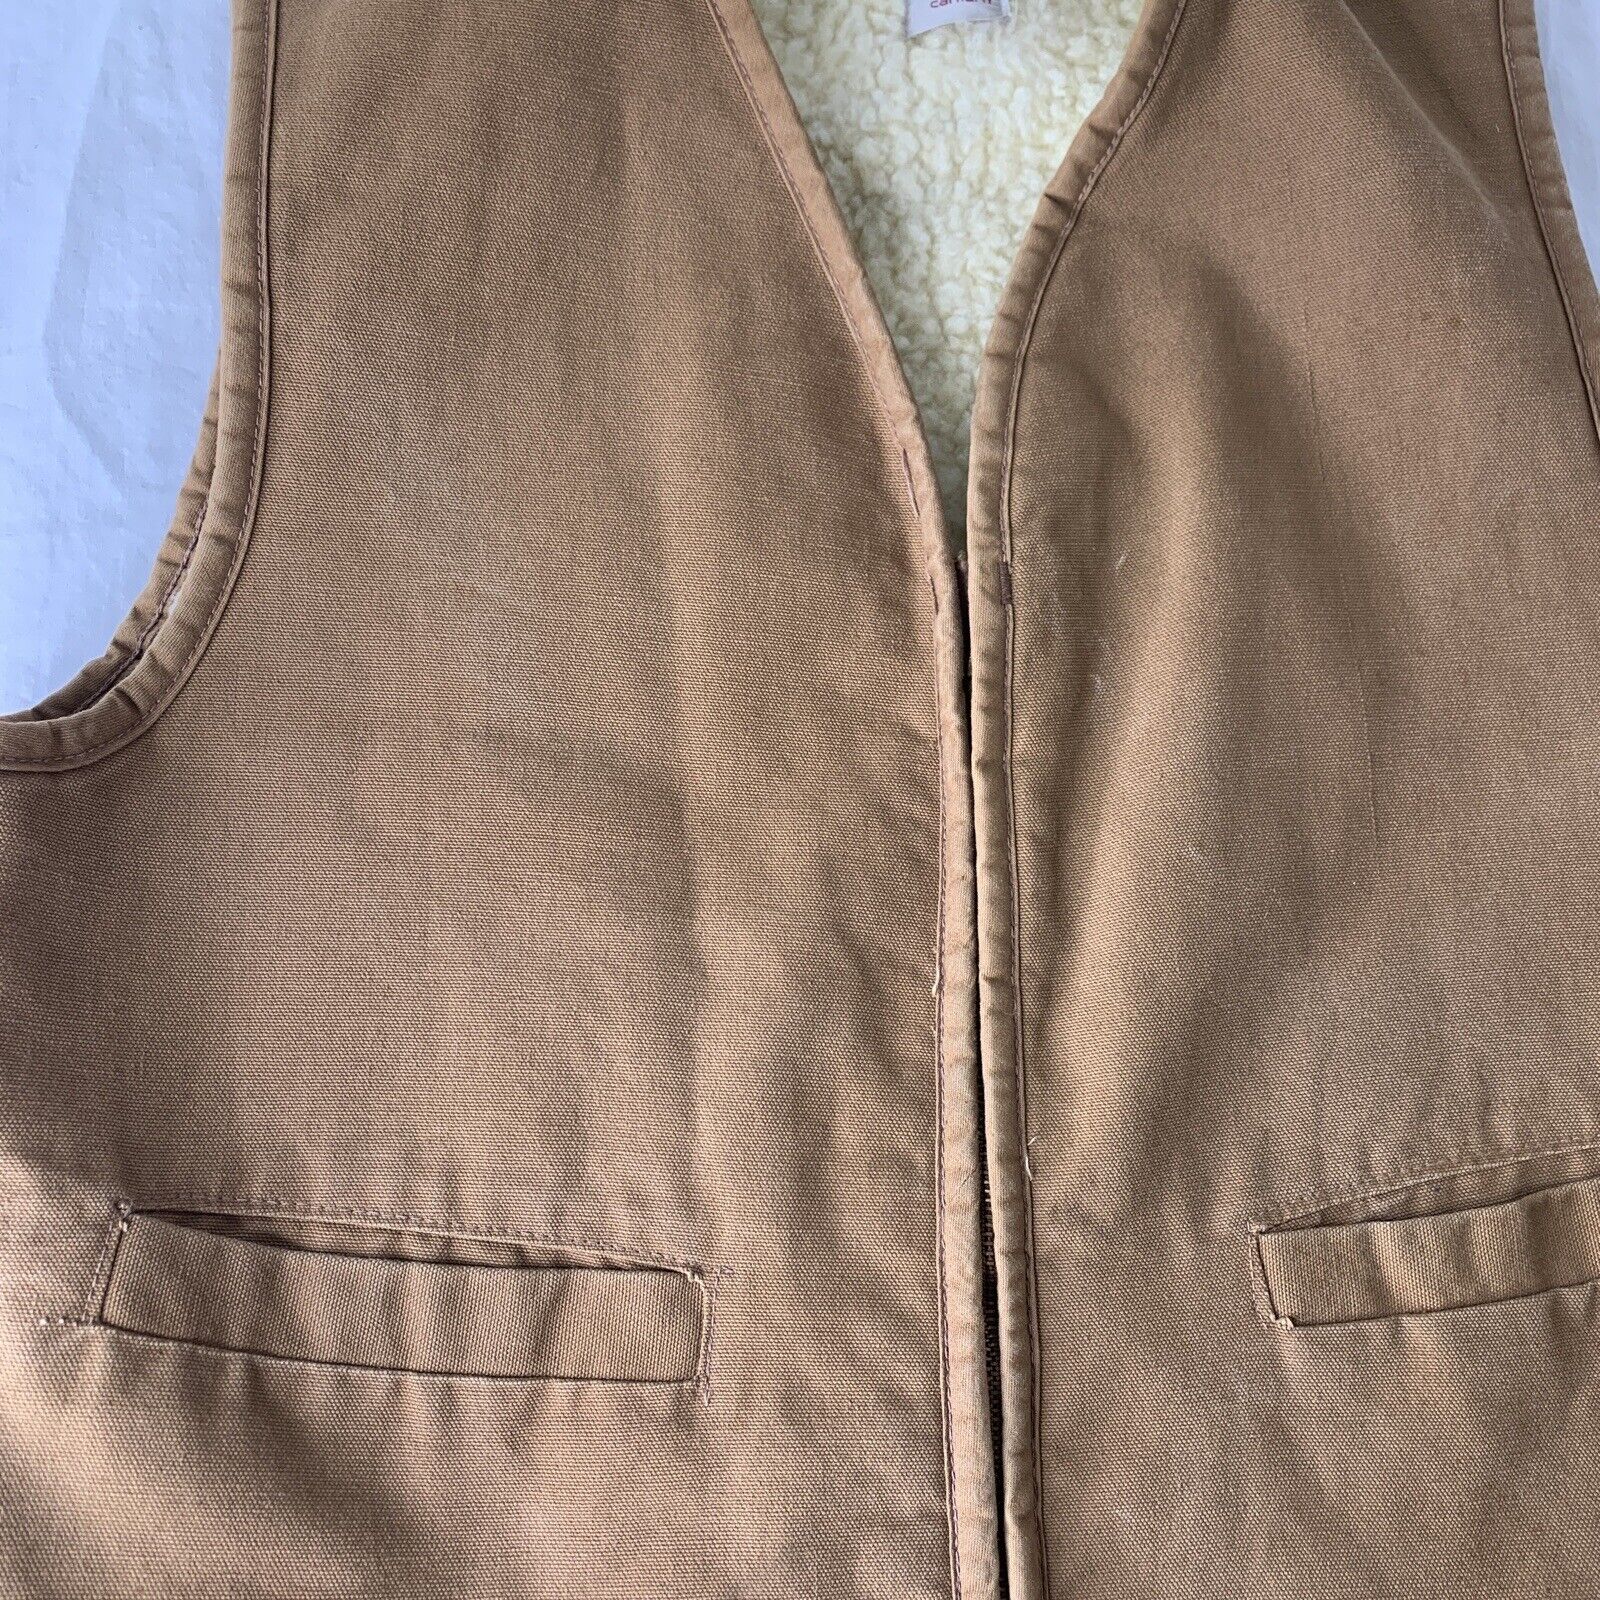 Vintage 90’s Carhartt Hunting Sherpa Lined Canvas Vest XL Zip Up Brown Work USA